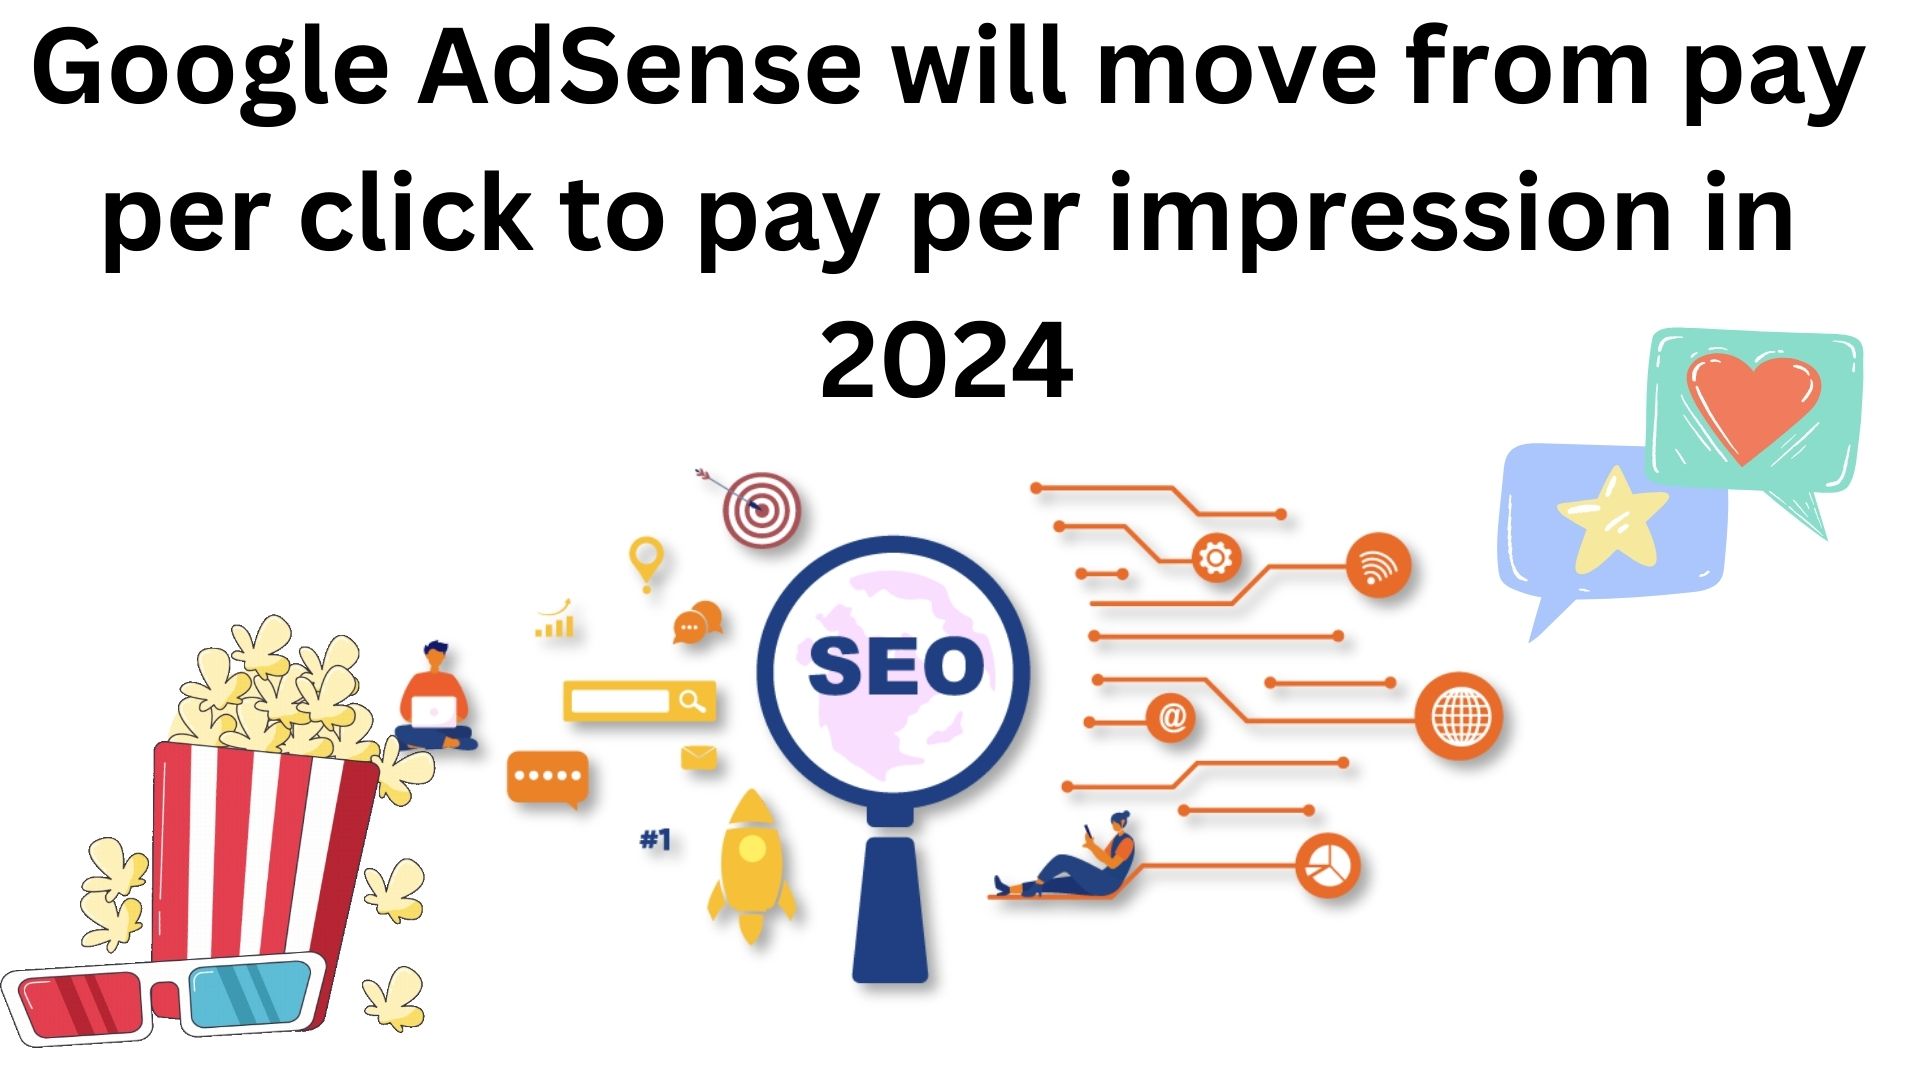 Google Adsense Will Move From Pay Per Click To Pay Per Impression In 2024